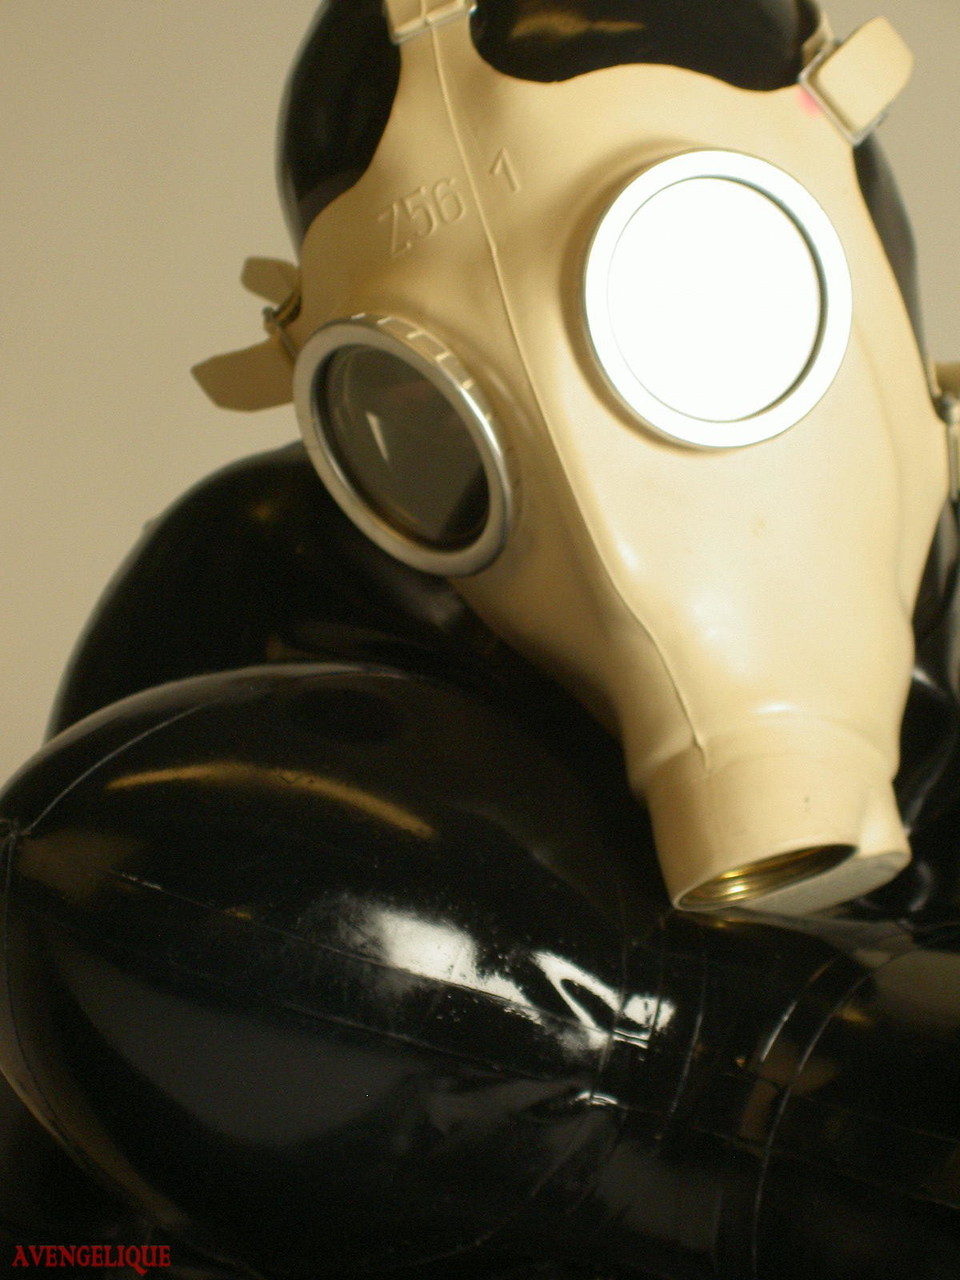 Solo model Darkwing Zero sports a gas mask while modelling latex clothing photo porno #428000072 | Rubber Tits Pics, Darkwing Zero, Latex, porno mobile